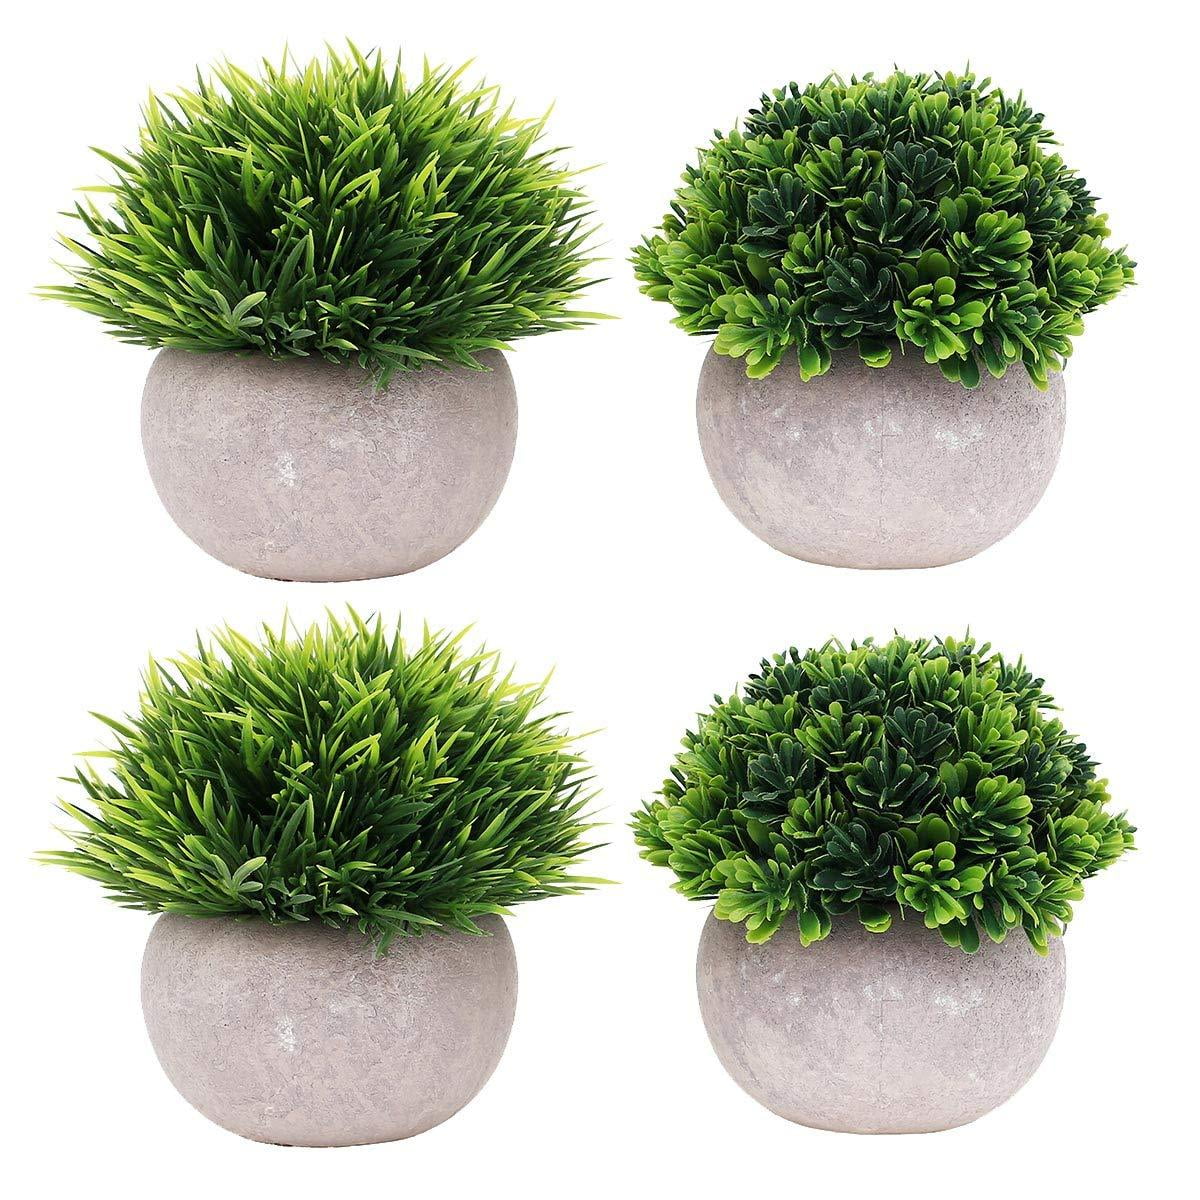 UltraOutlet 2-Pack Small Artificial Plants Faked Mini Plants Potted 